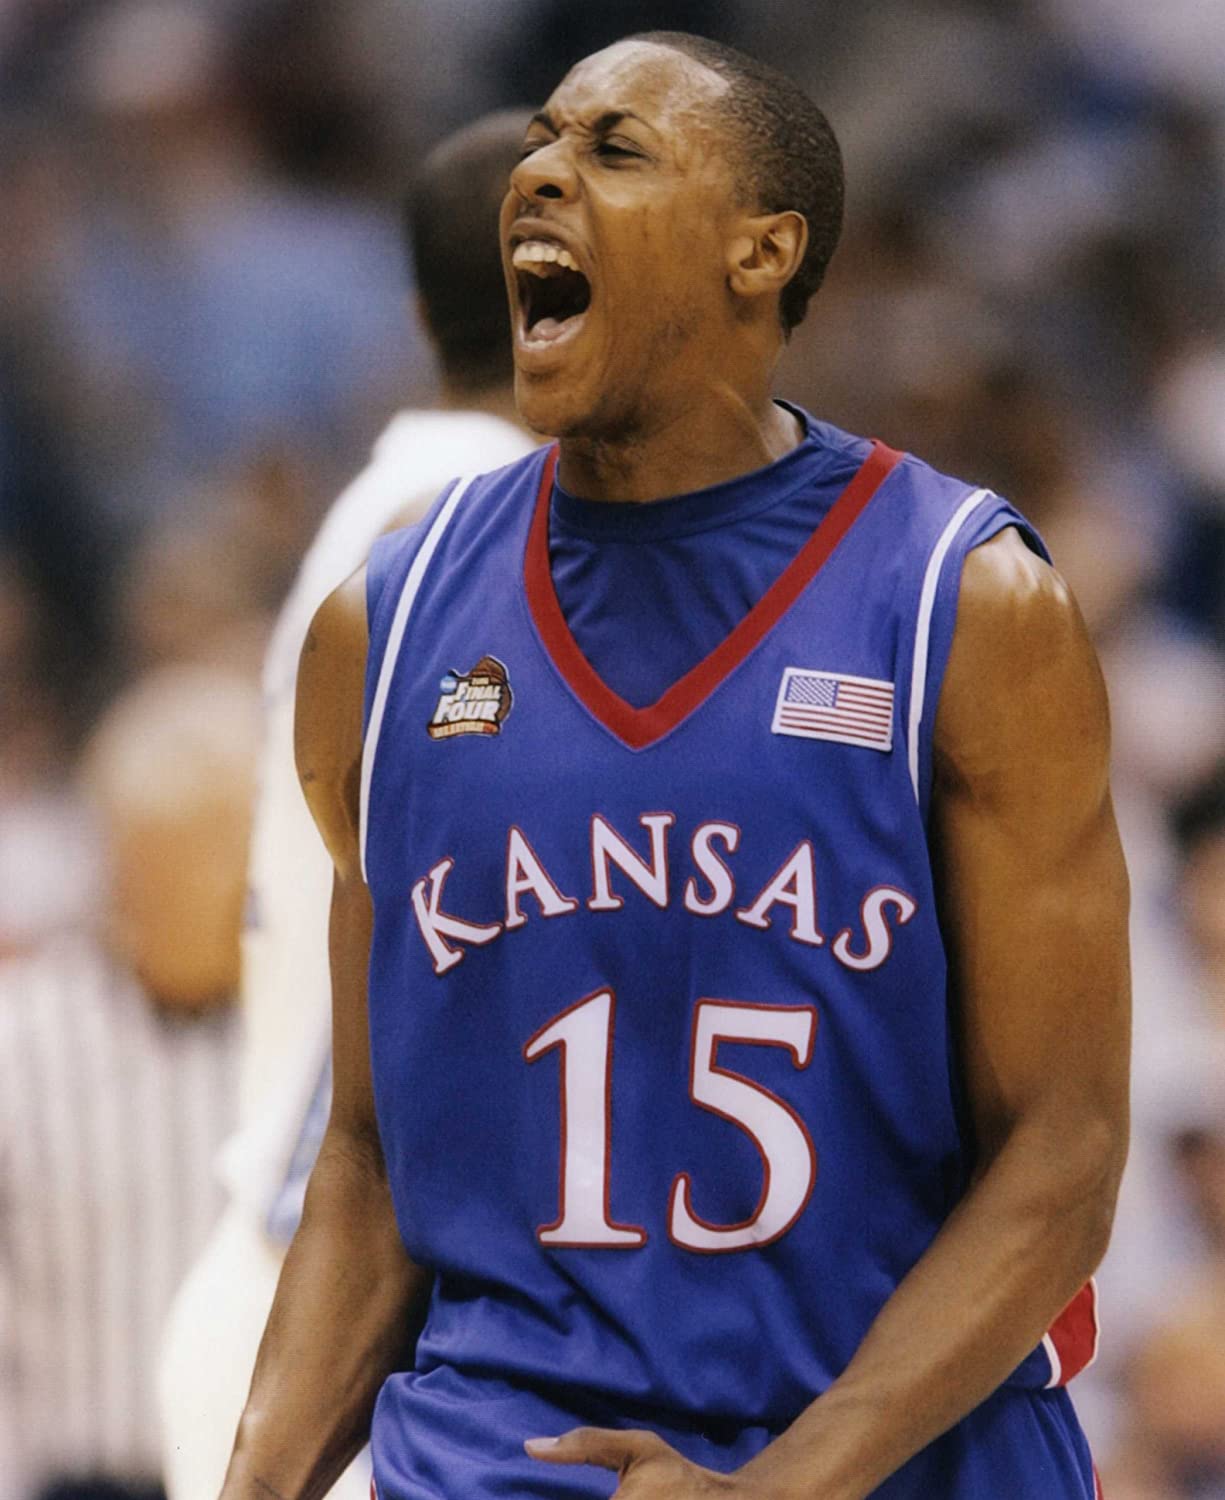 Chalmers In The Kansas Team